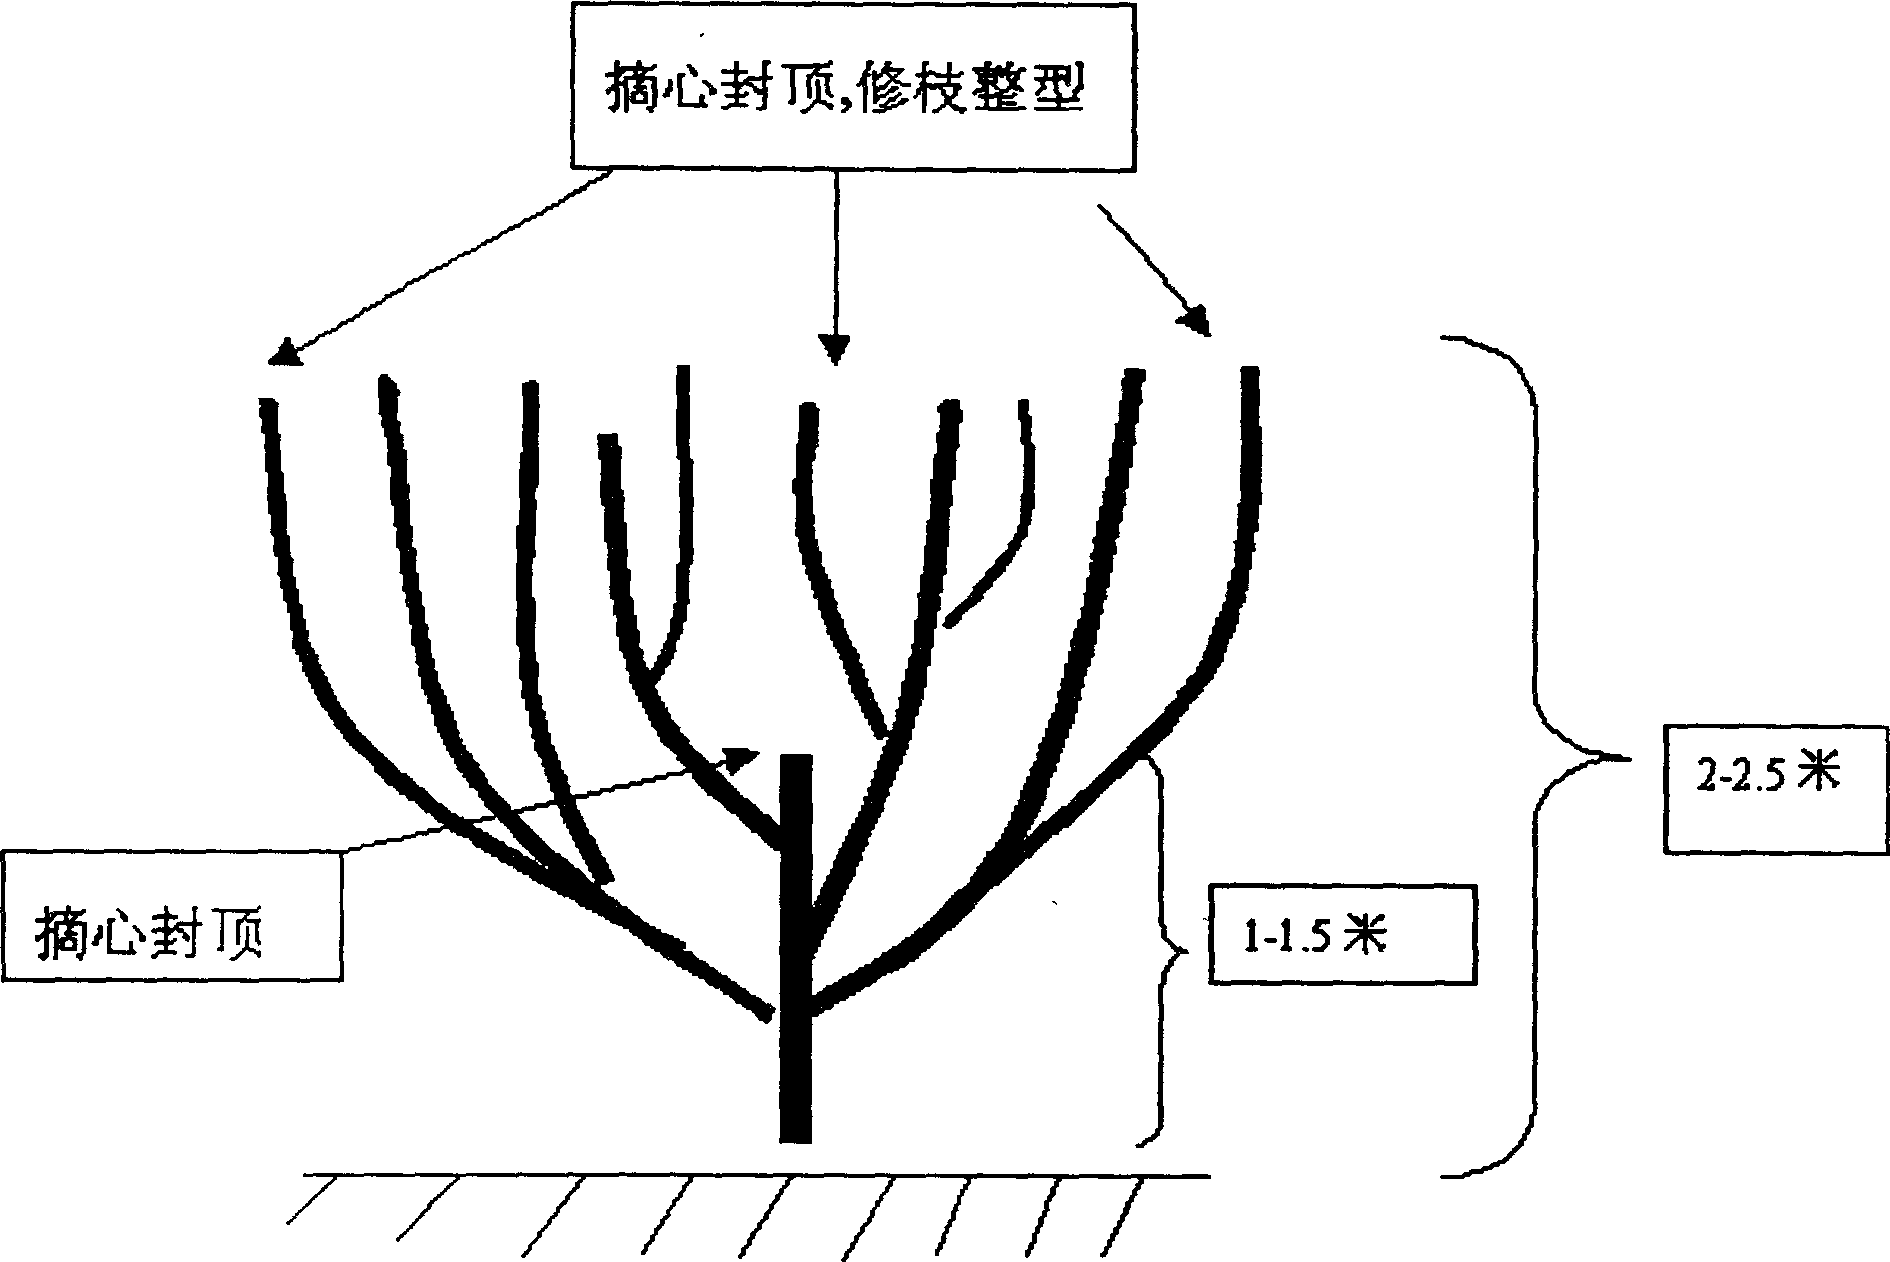 Artificial dwarfing and yield increasing jatropha cultivating process